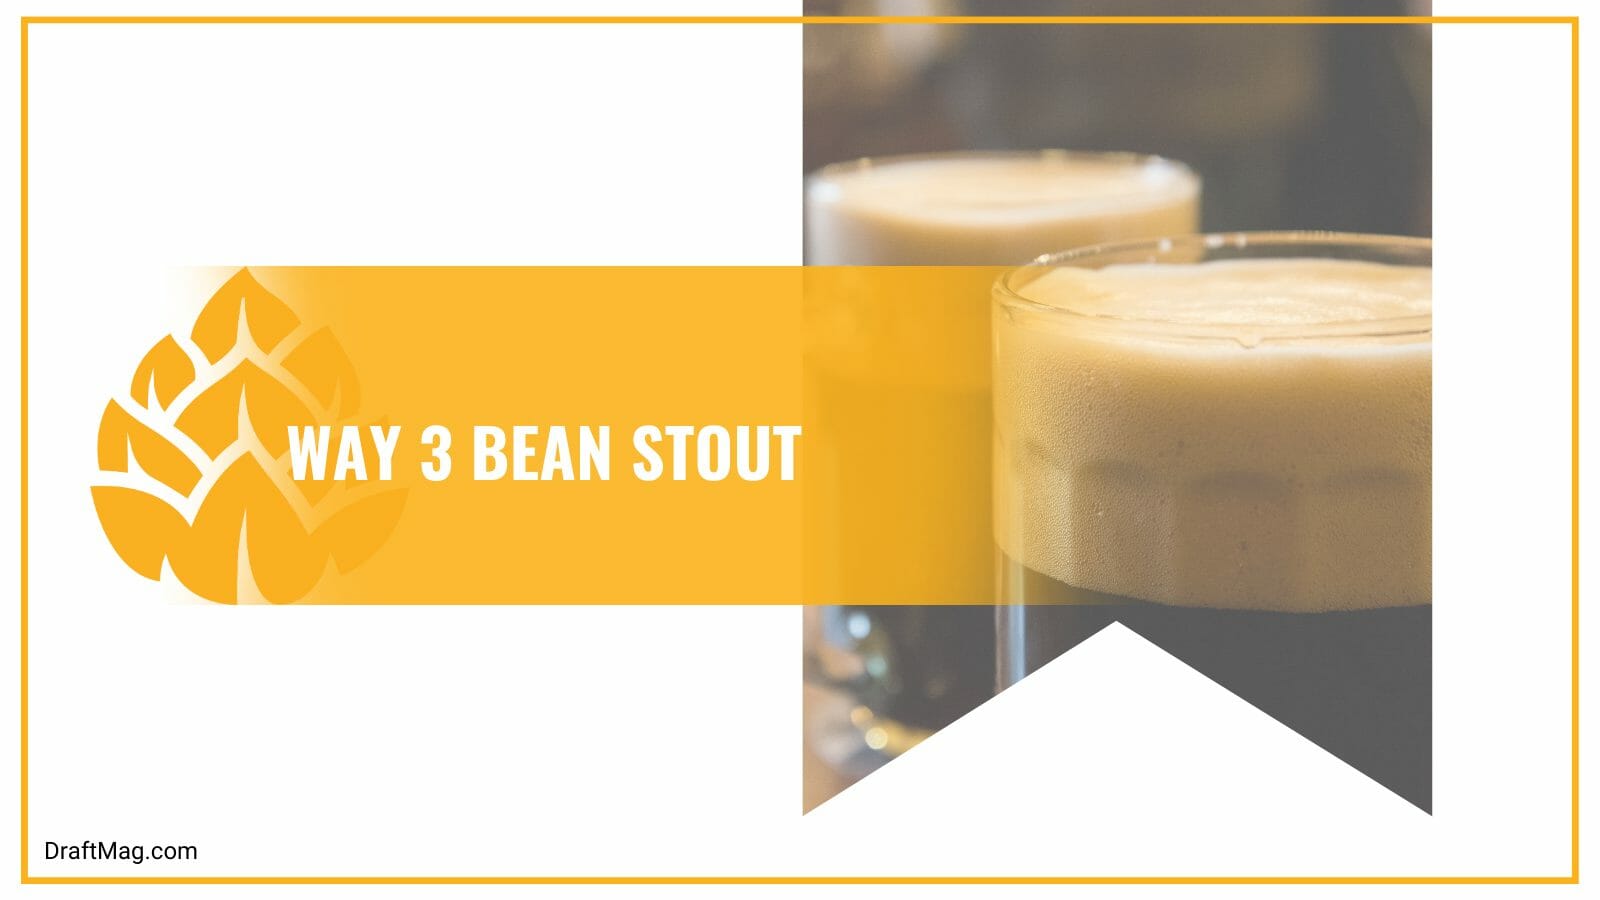 Way bean stout a light bodied beer